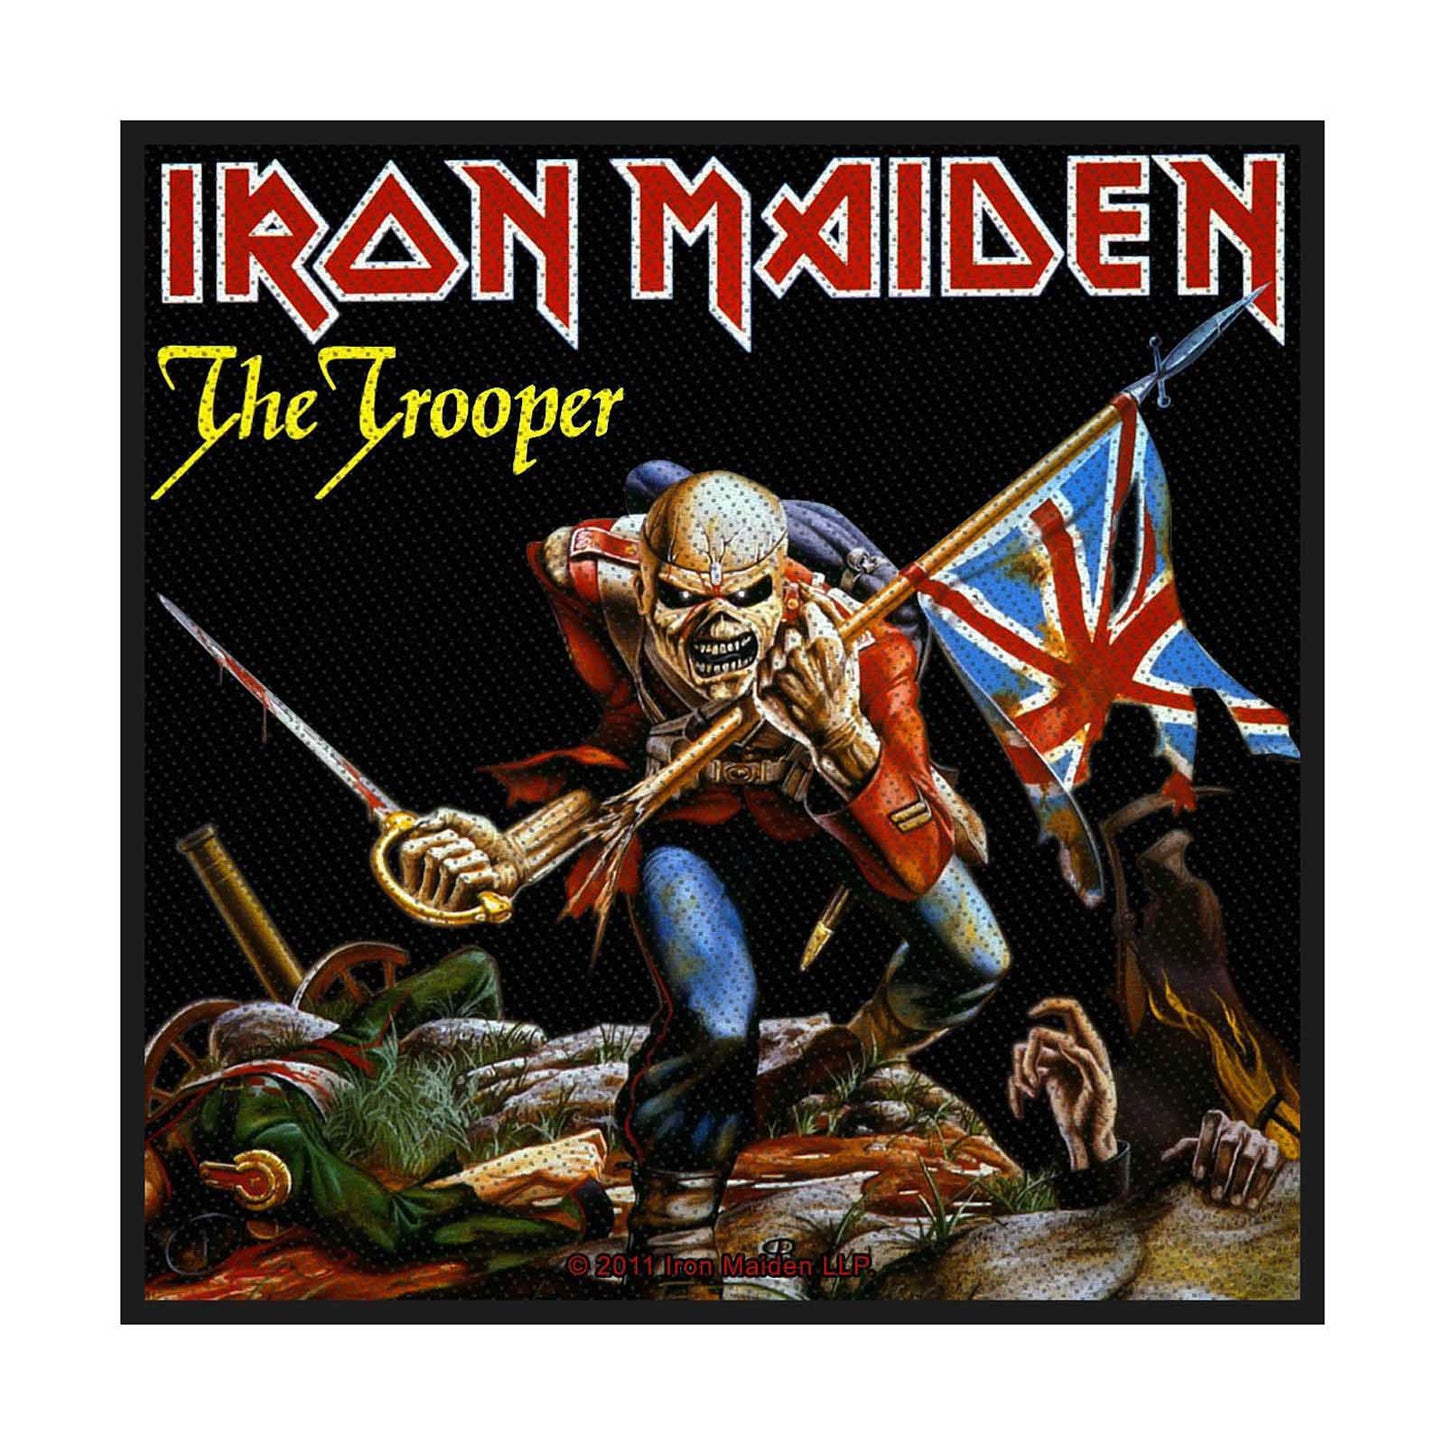 IRON MAIDEN STANDARD PATCH: THE TROOPER